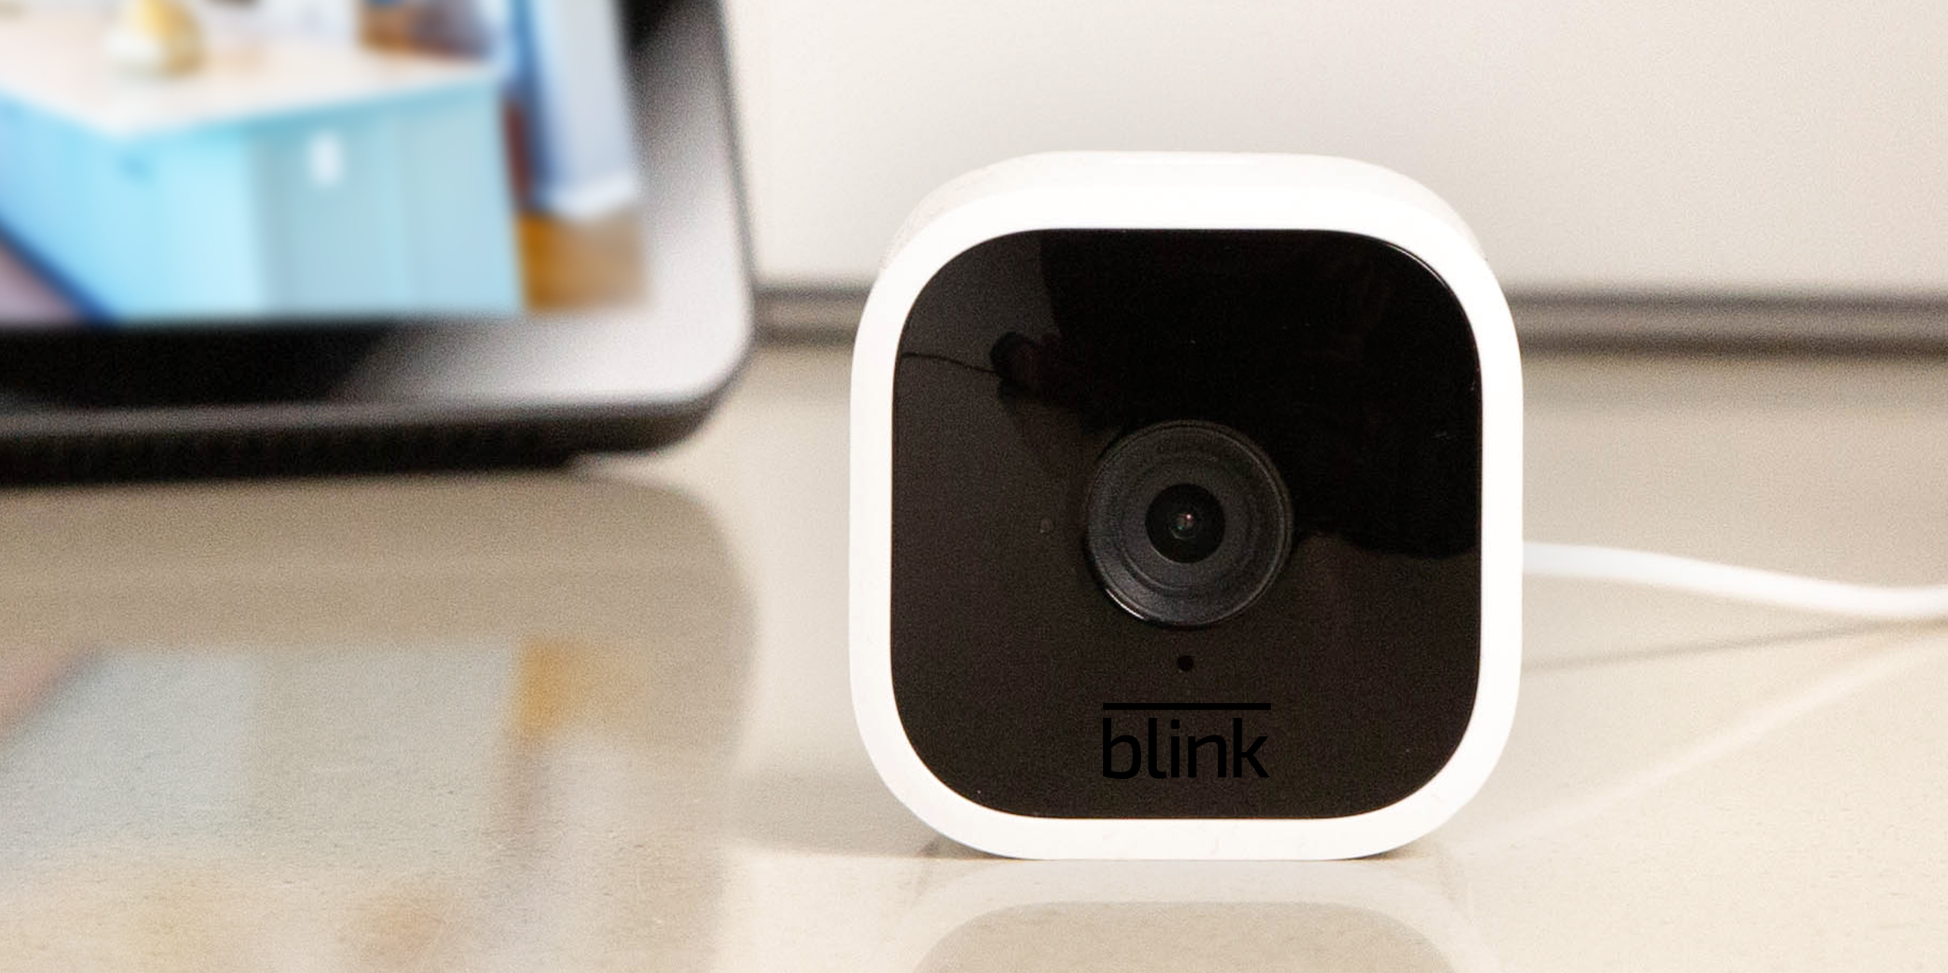 Blink Mini camera sitting on a table